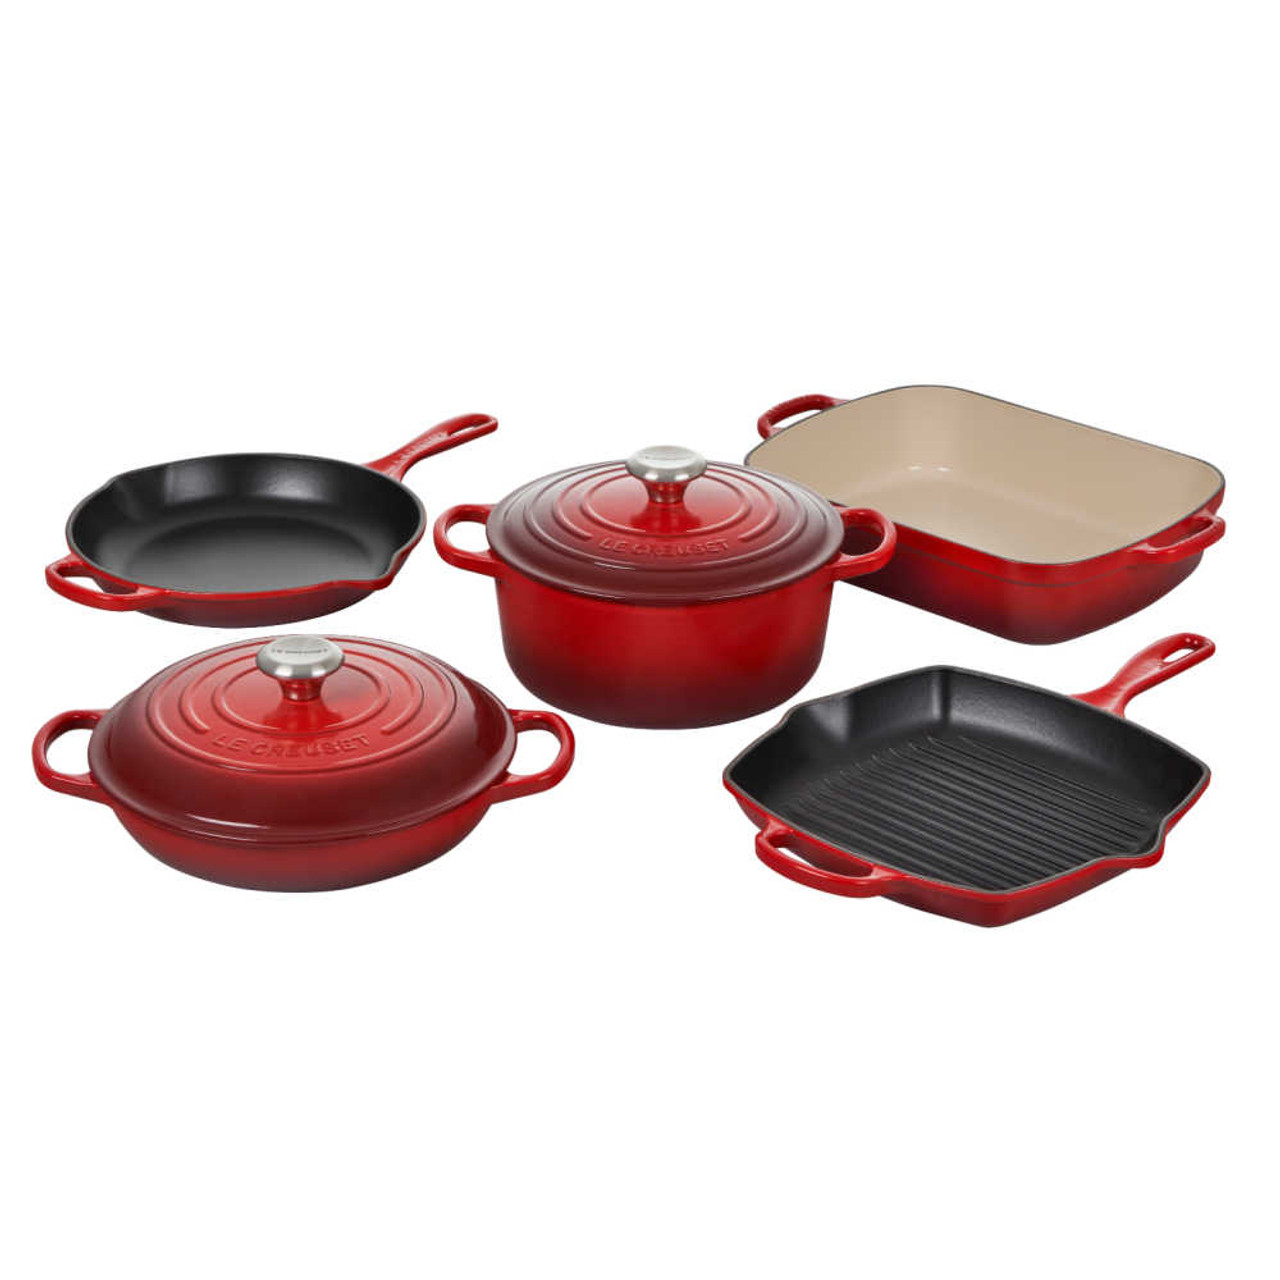 https://cdn11.bigcommerce.com/s-hccytny0od/images/stencil/1280x1280/products/5223/22589/Le_Creuset_7-Piece_Cast_Iron_Cookware_Set_in_Cerise__48089.1674082656.jpg?c=2?imbypass=on